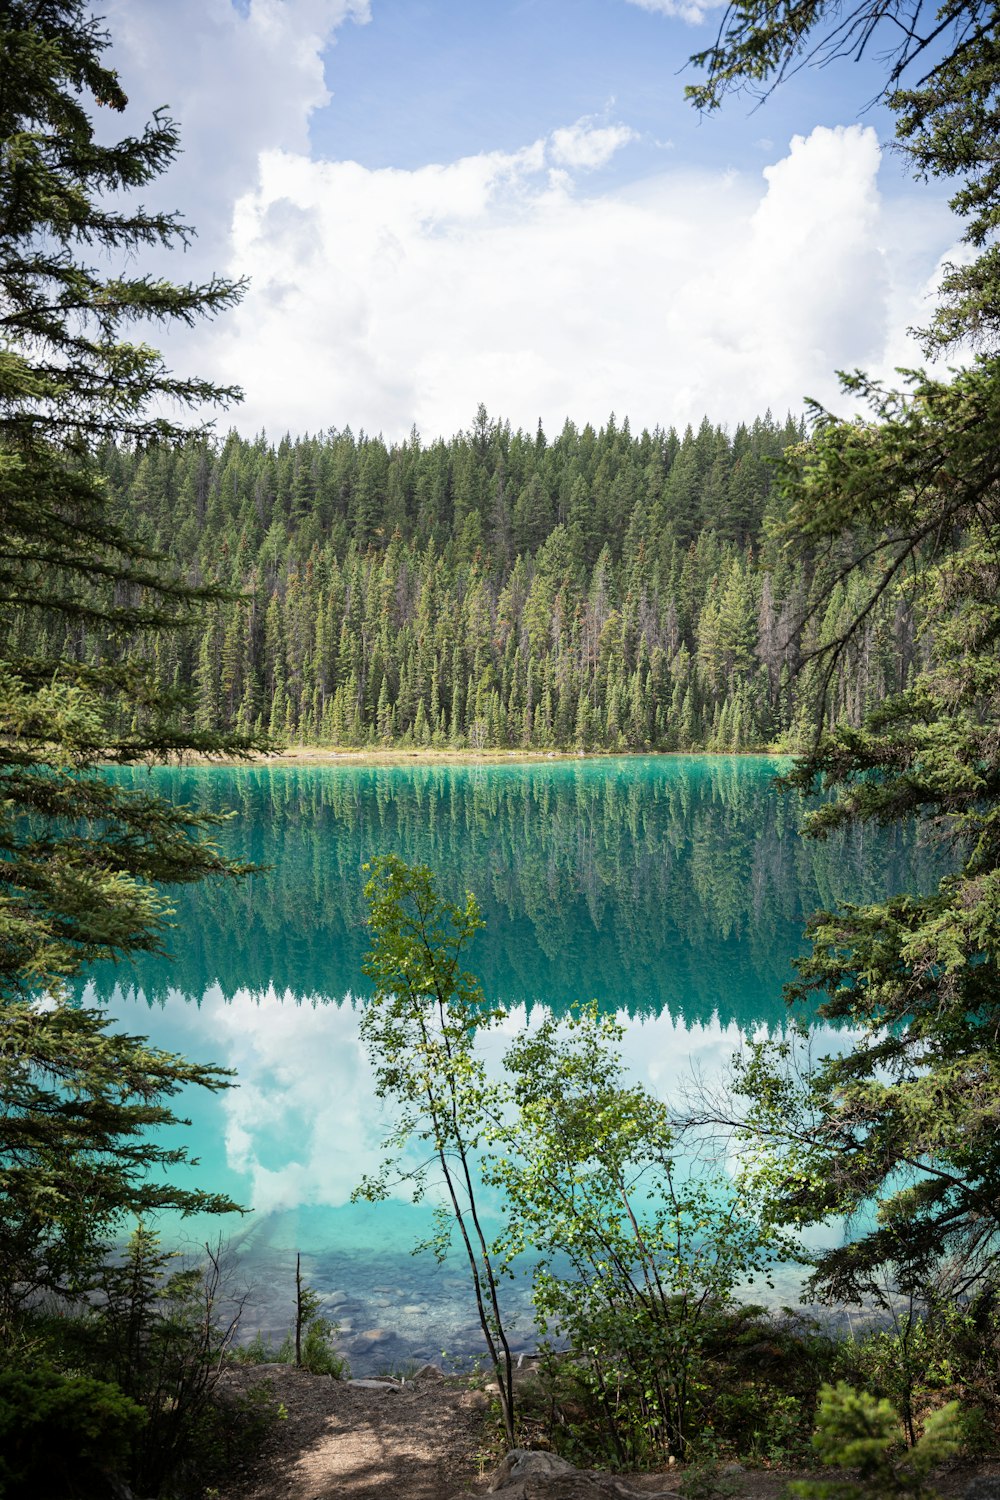 a blue lake surrounded by trees and a forest